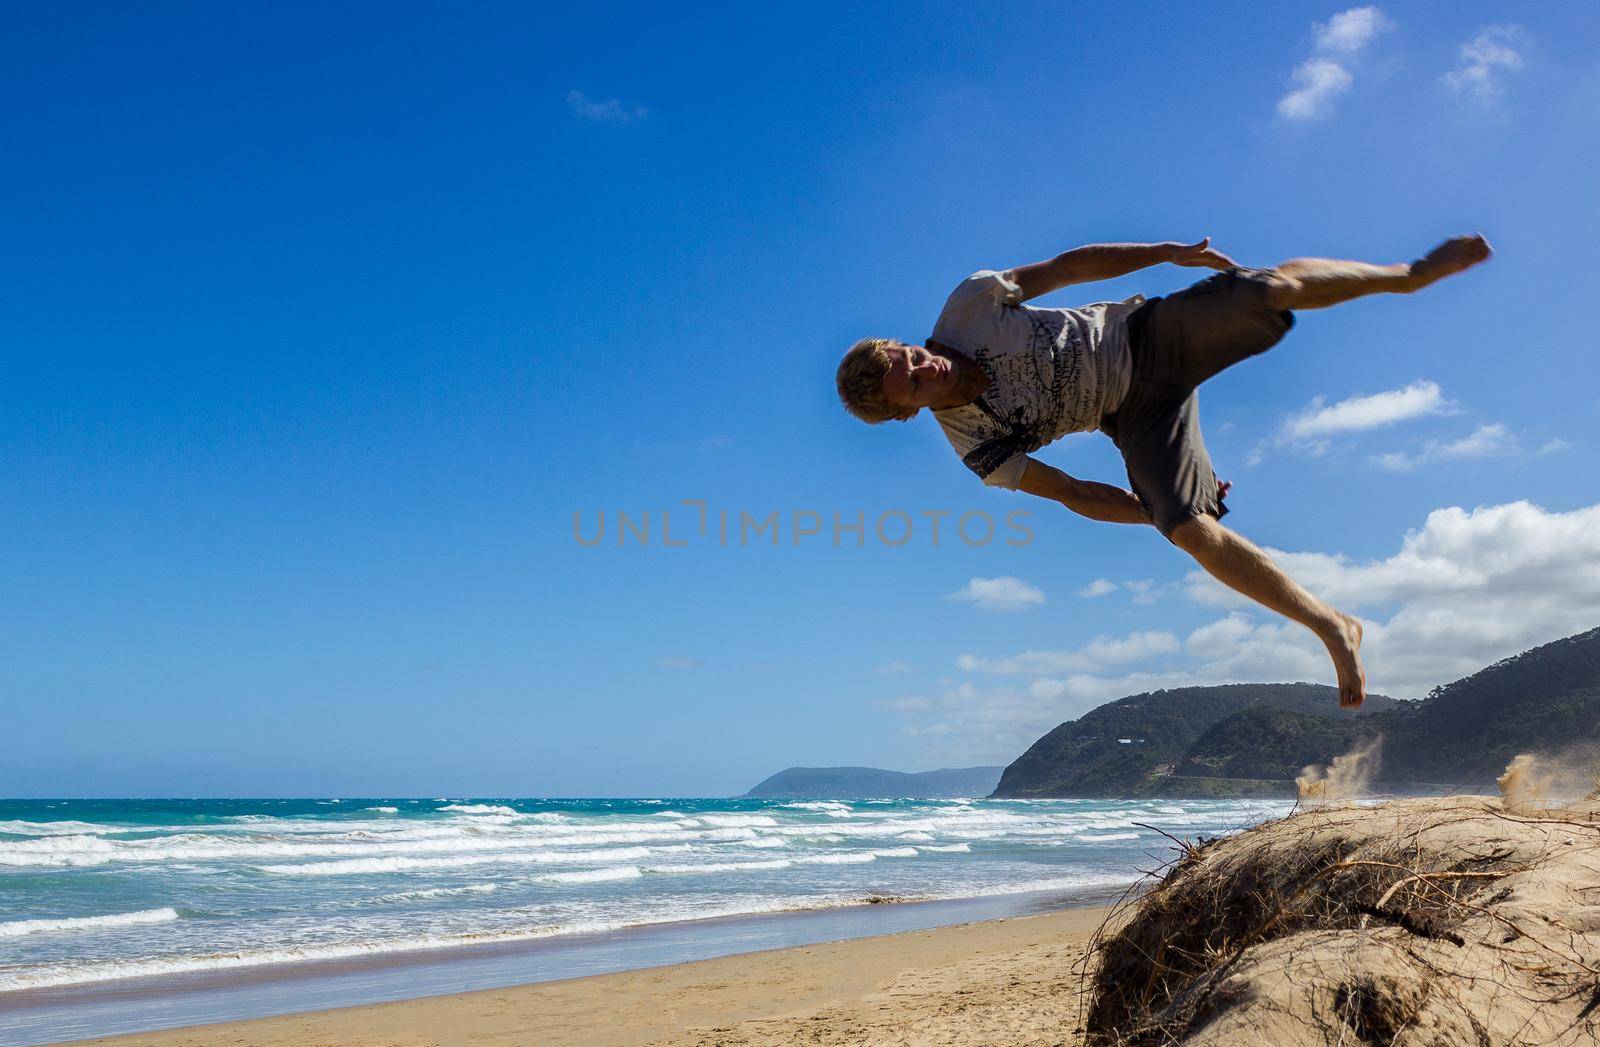 Portrait of young parkour man doing flip or somersault on the sand, Great Ocean Road, Australia by bettercallcurry